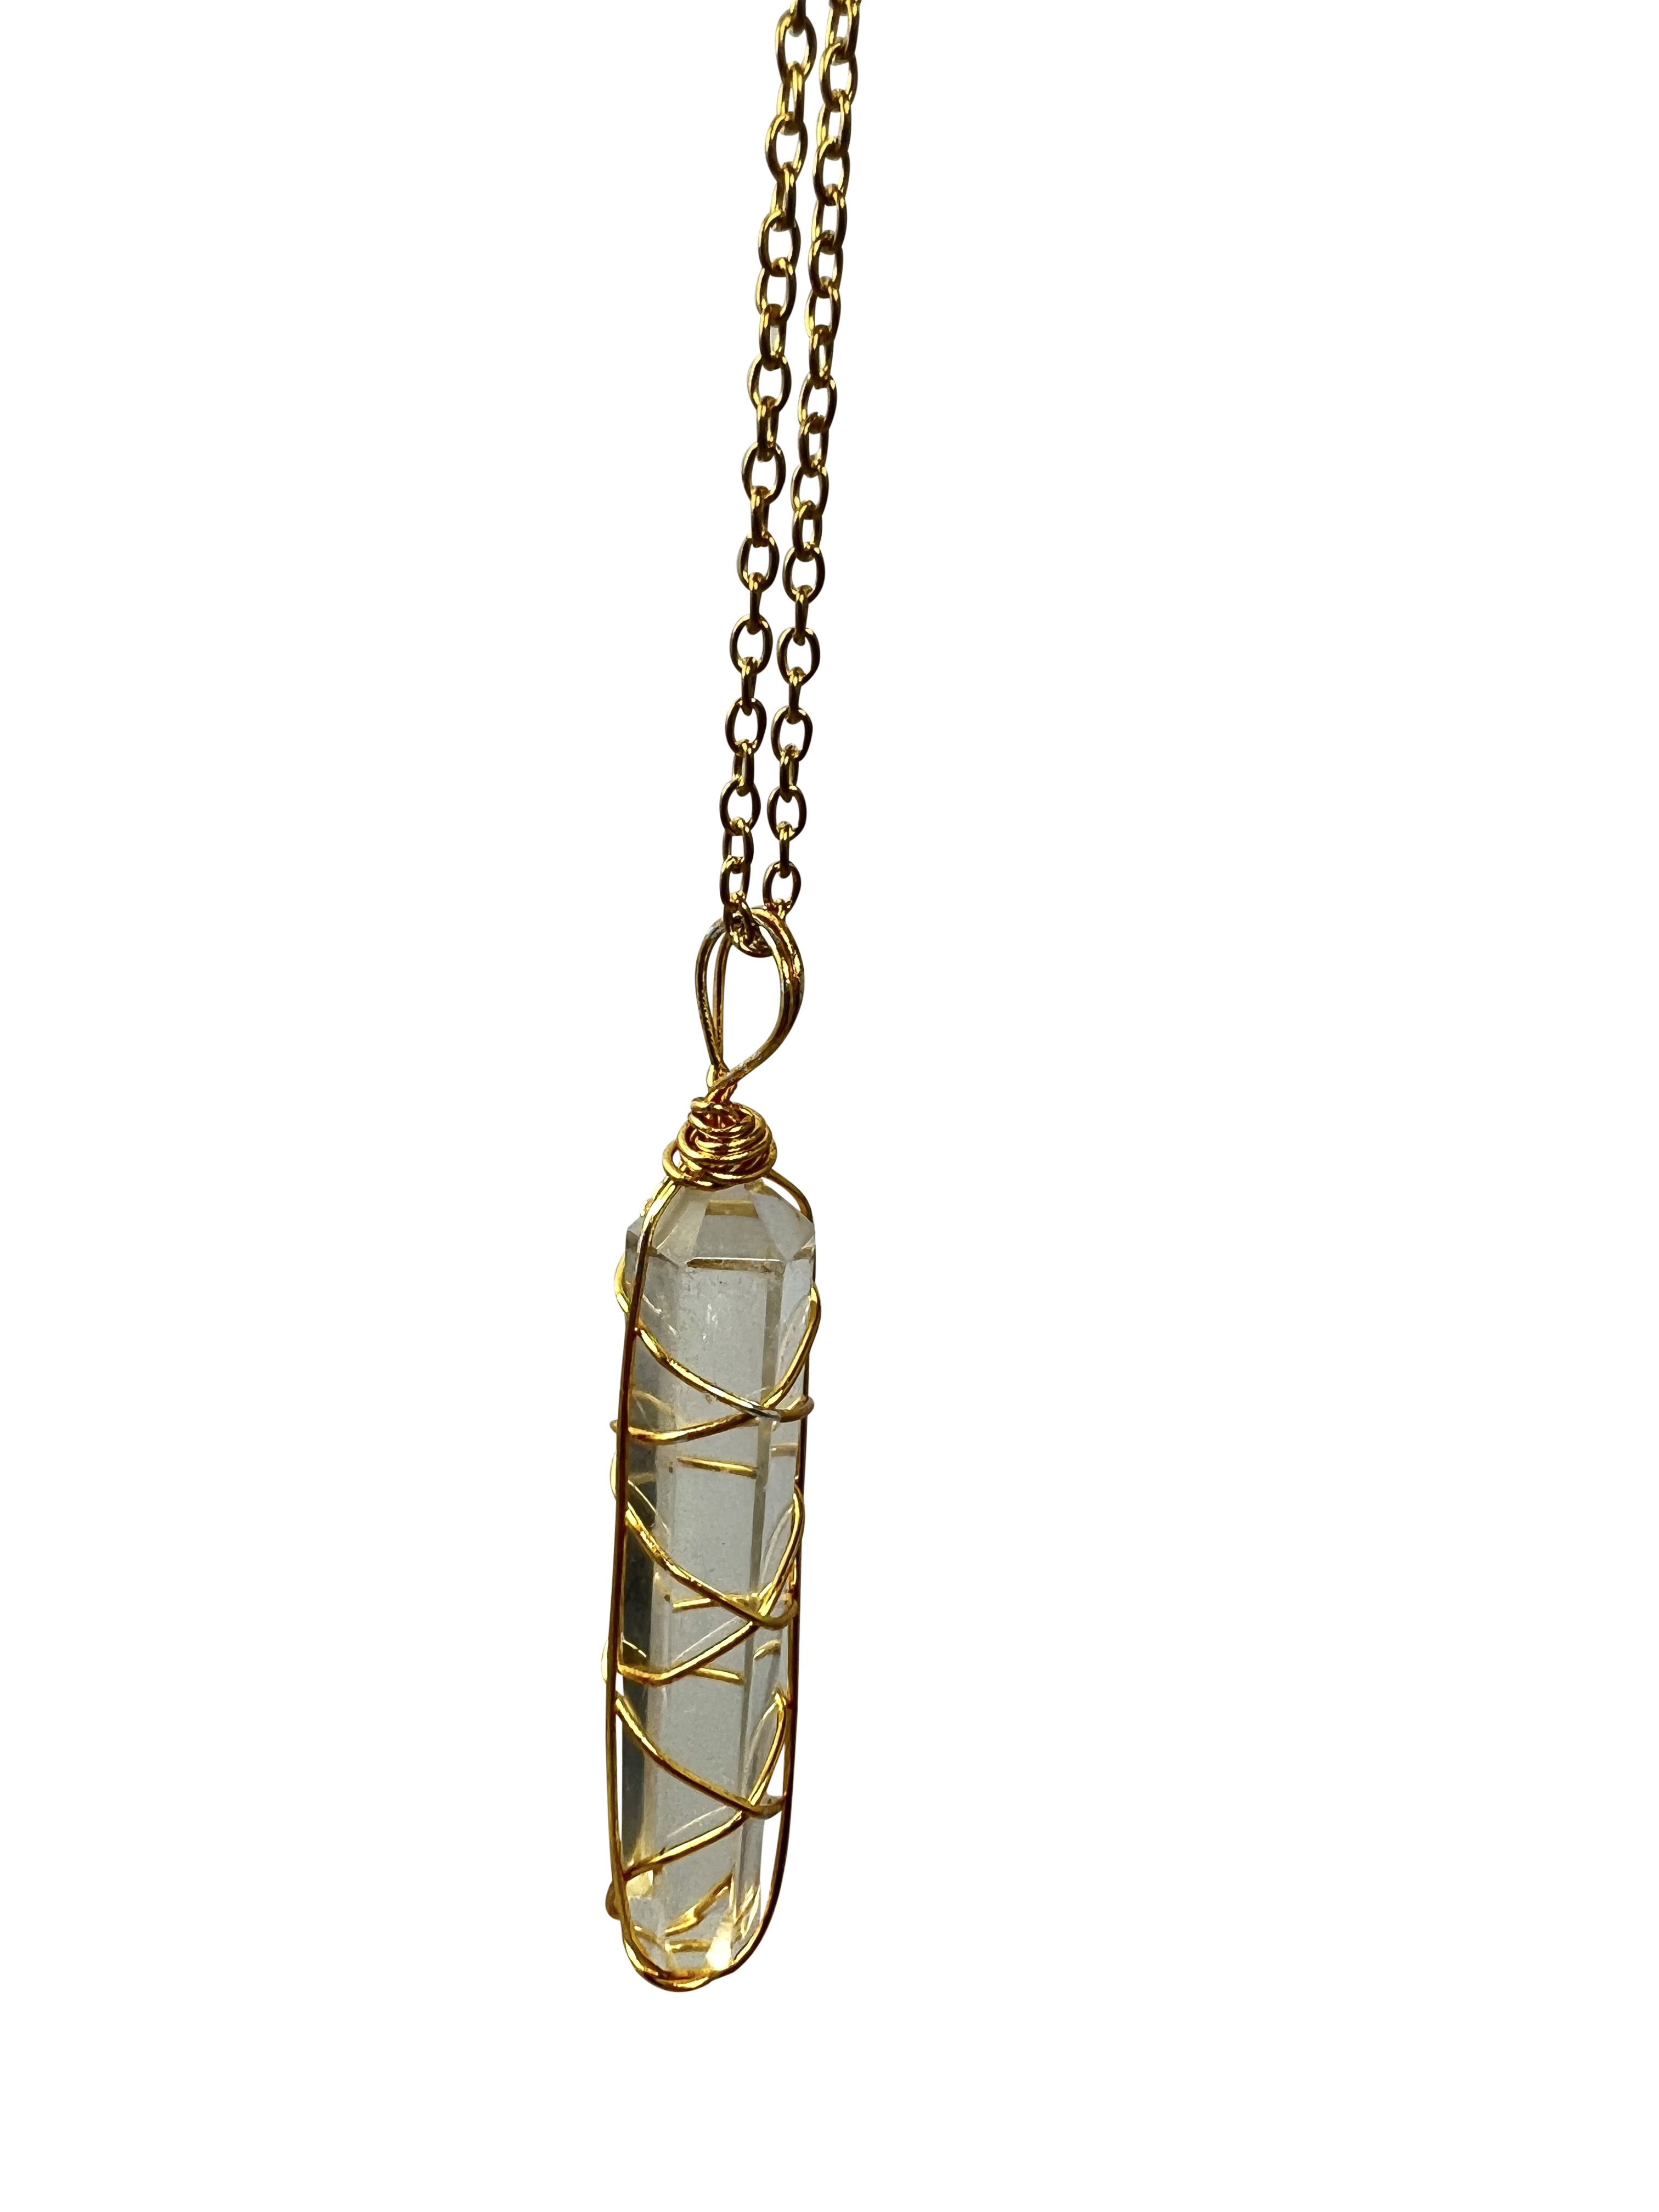 Clear Quartz Double Pointed Terminated Pendant Necklace Gold